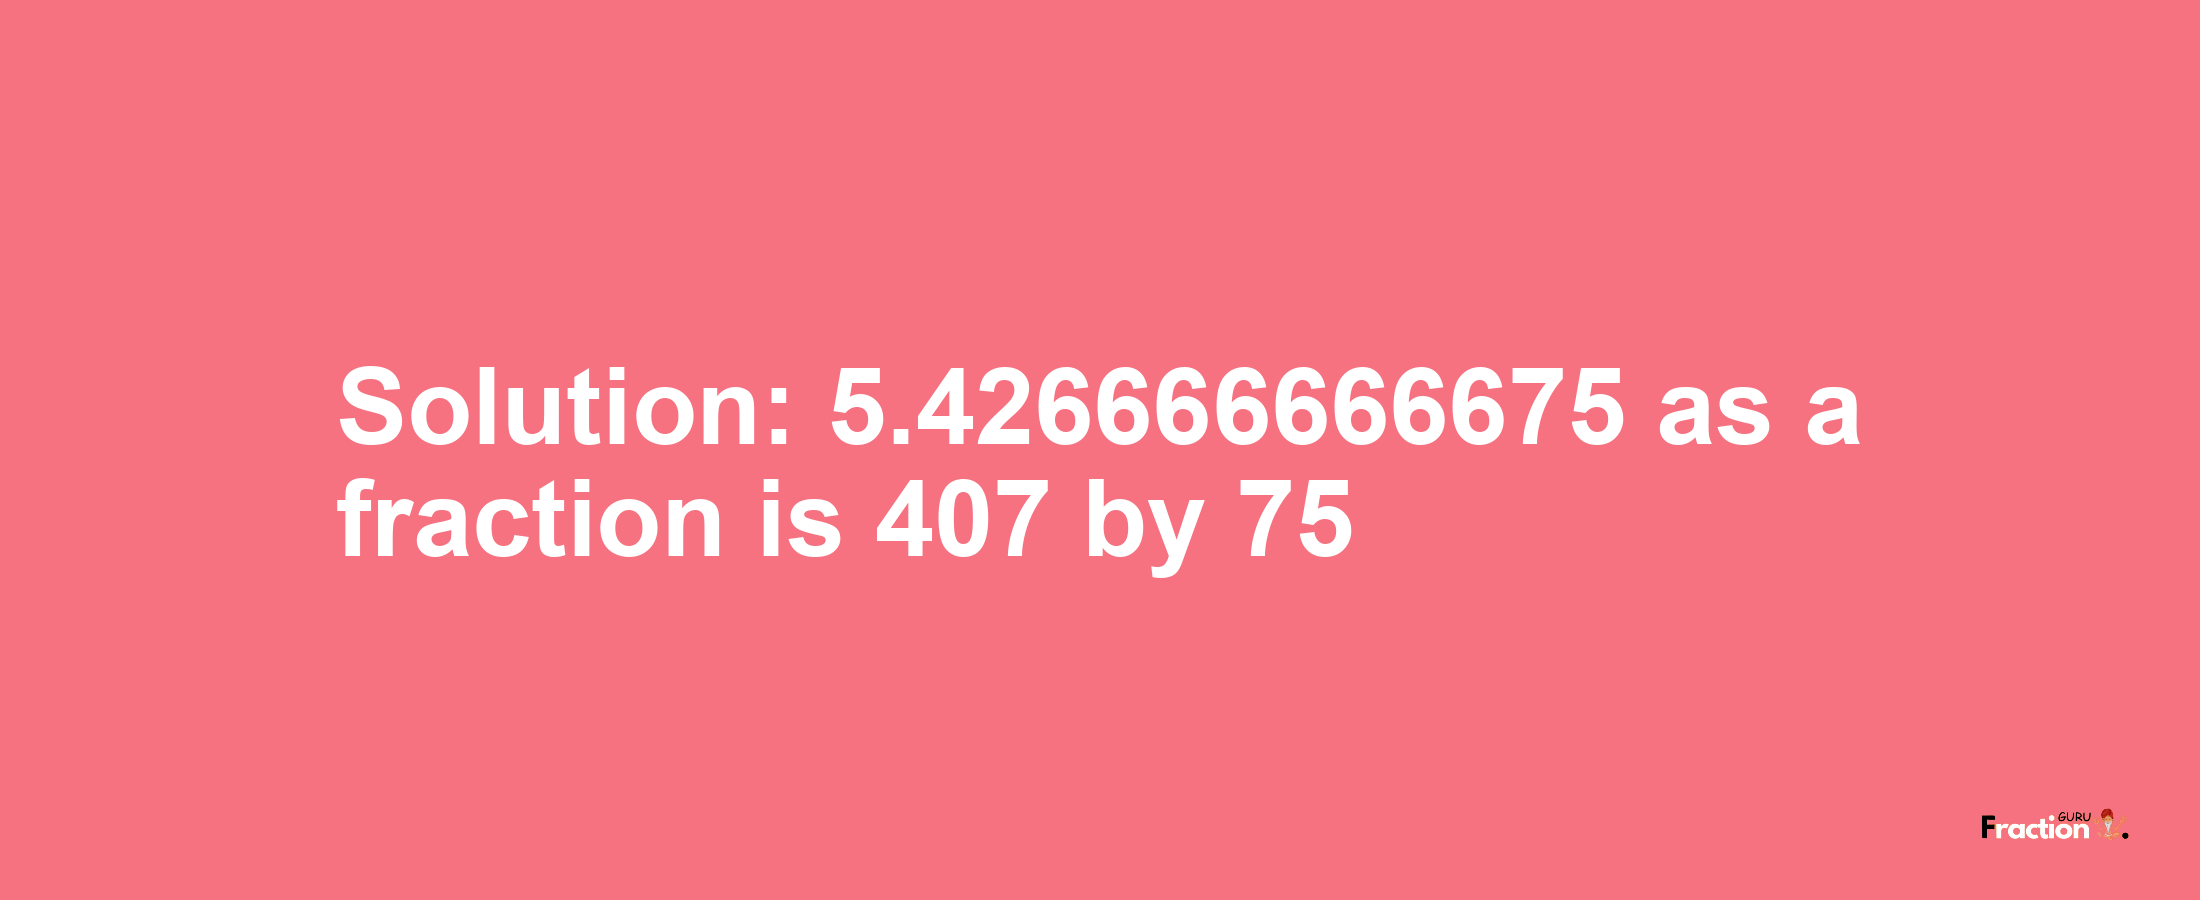 Solution:5.426666666675 as a fraction is 407/75